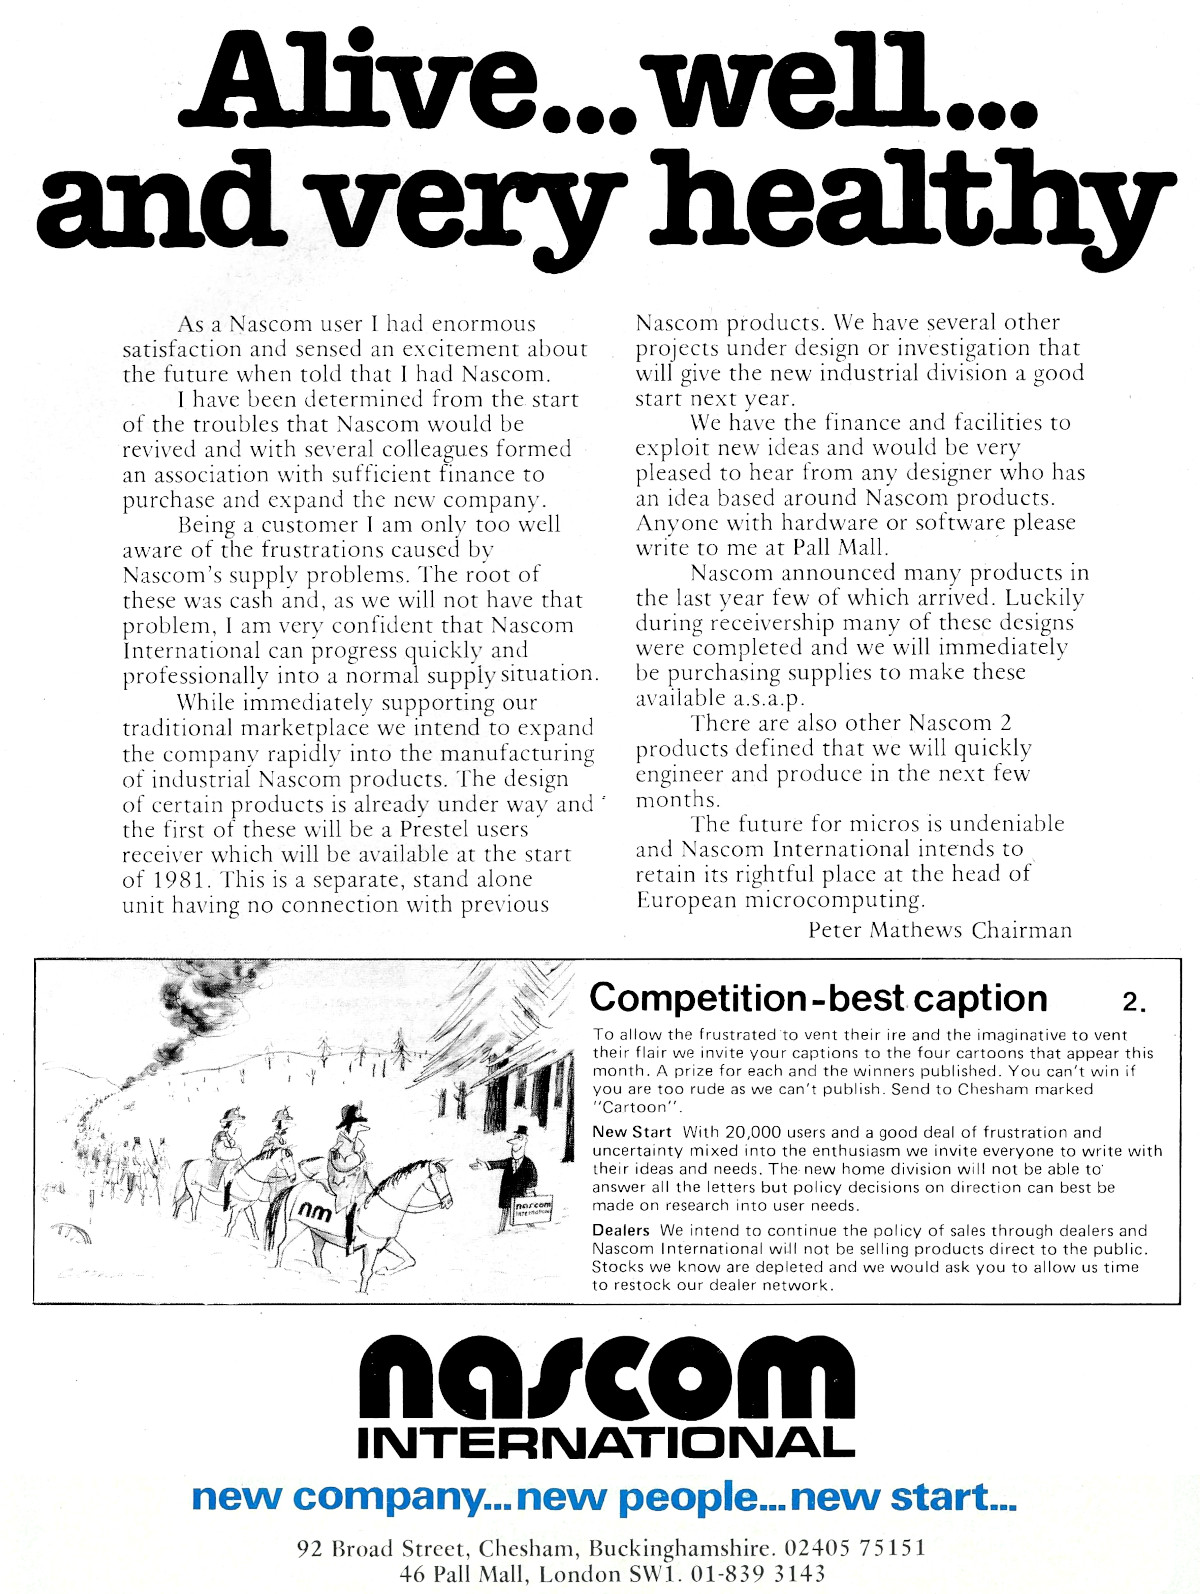 Nascom has a bit of a re-launch towards the end of 1980, with a slight rebrand to Nascom International.  From Personal Computer World, December 1980